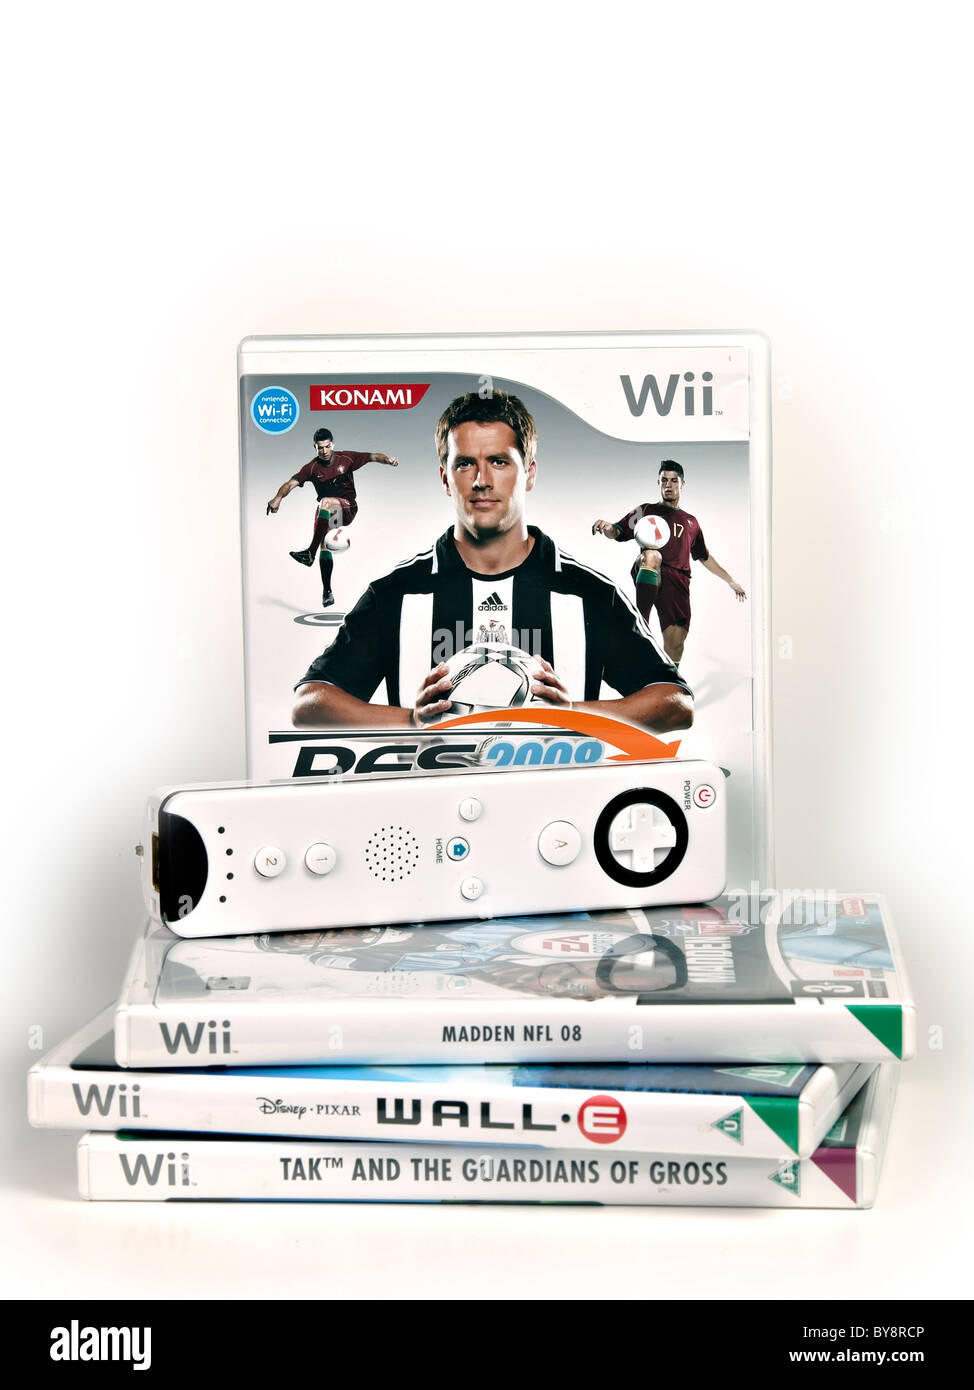 Nintendo Wii games and a Wii controller on white background Stock Photo